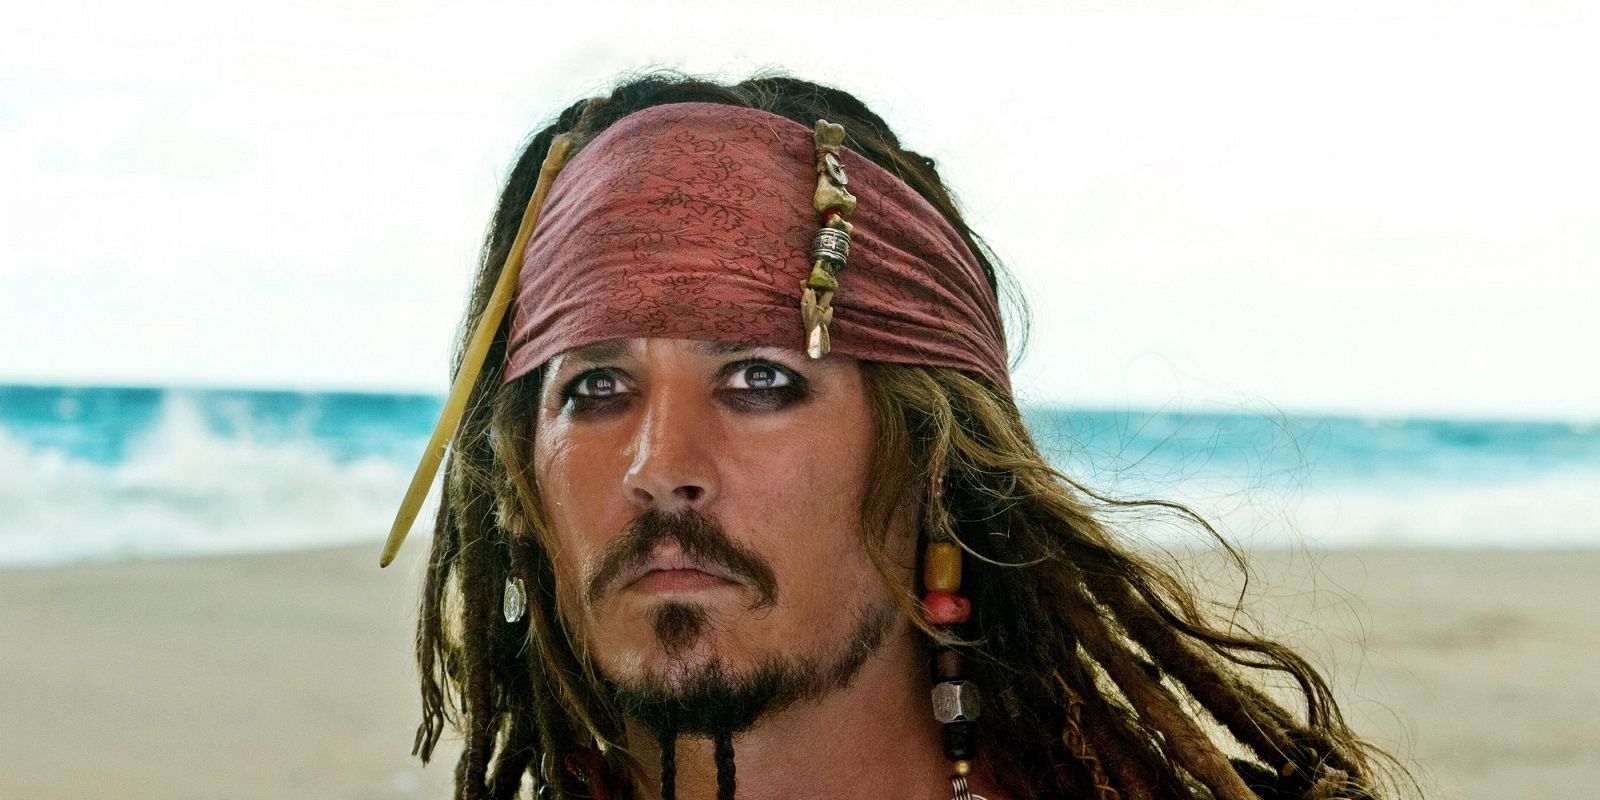 Jack Sparrow in Pirates of the Caribeean